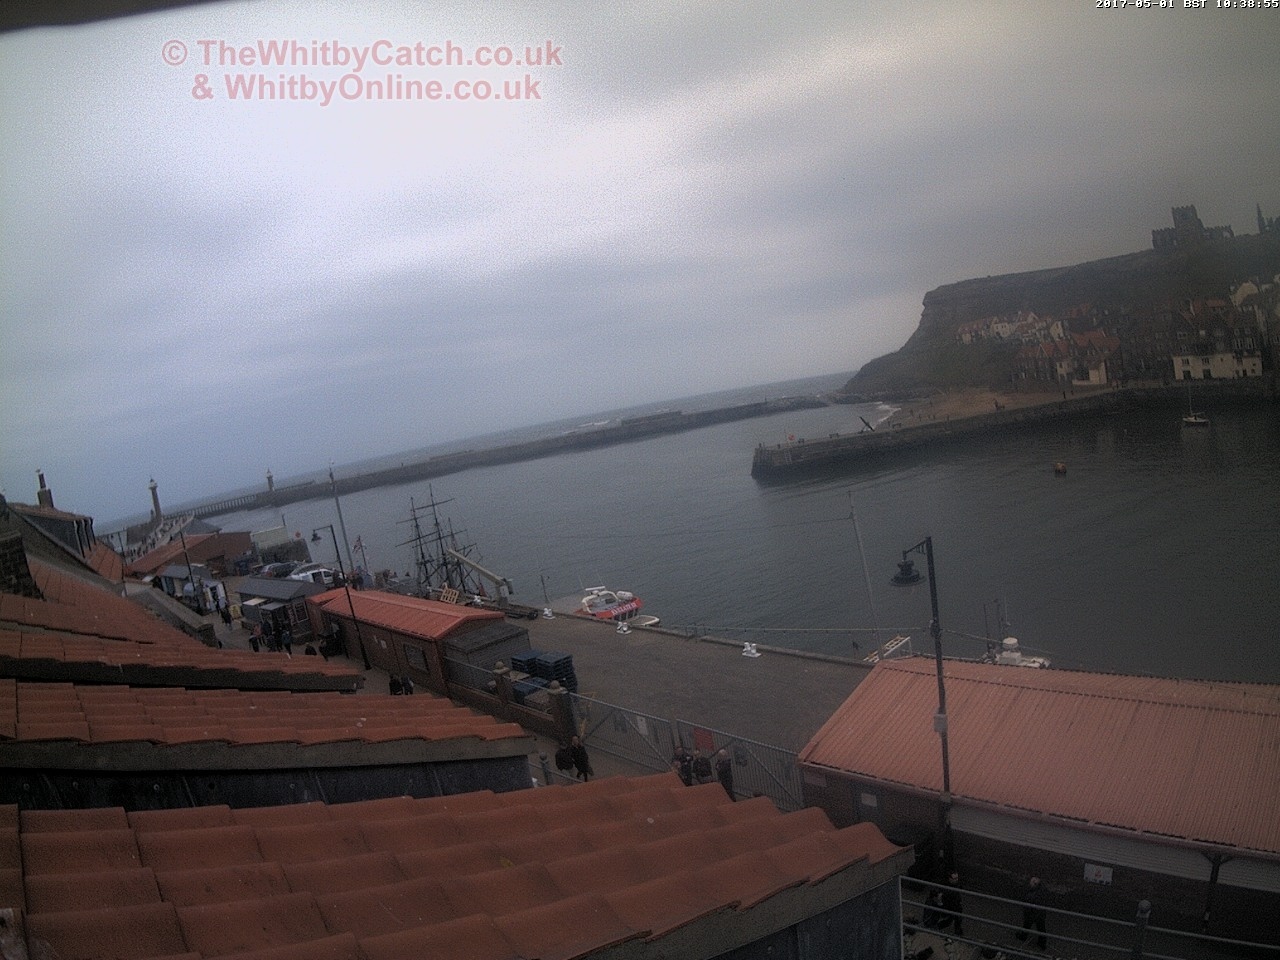 Whitby Mon 1st May 2017 10:39.